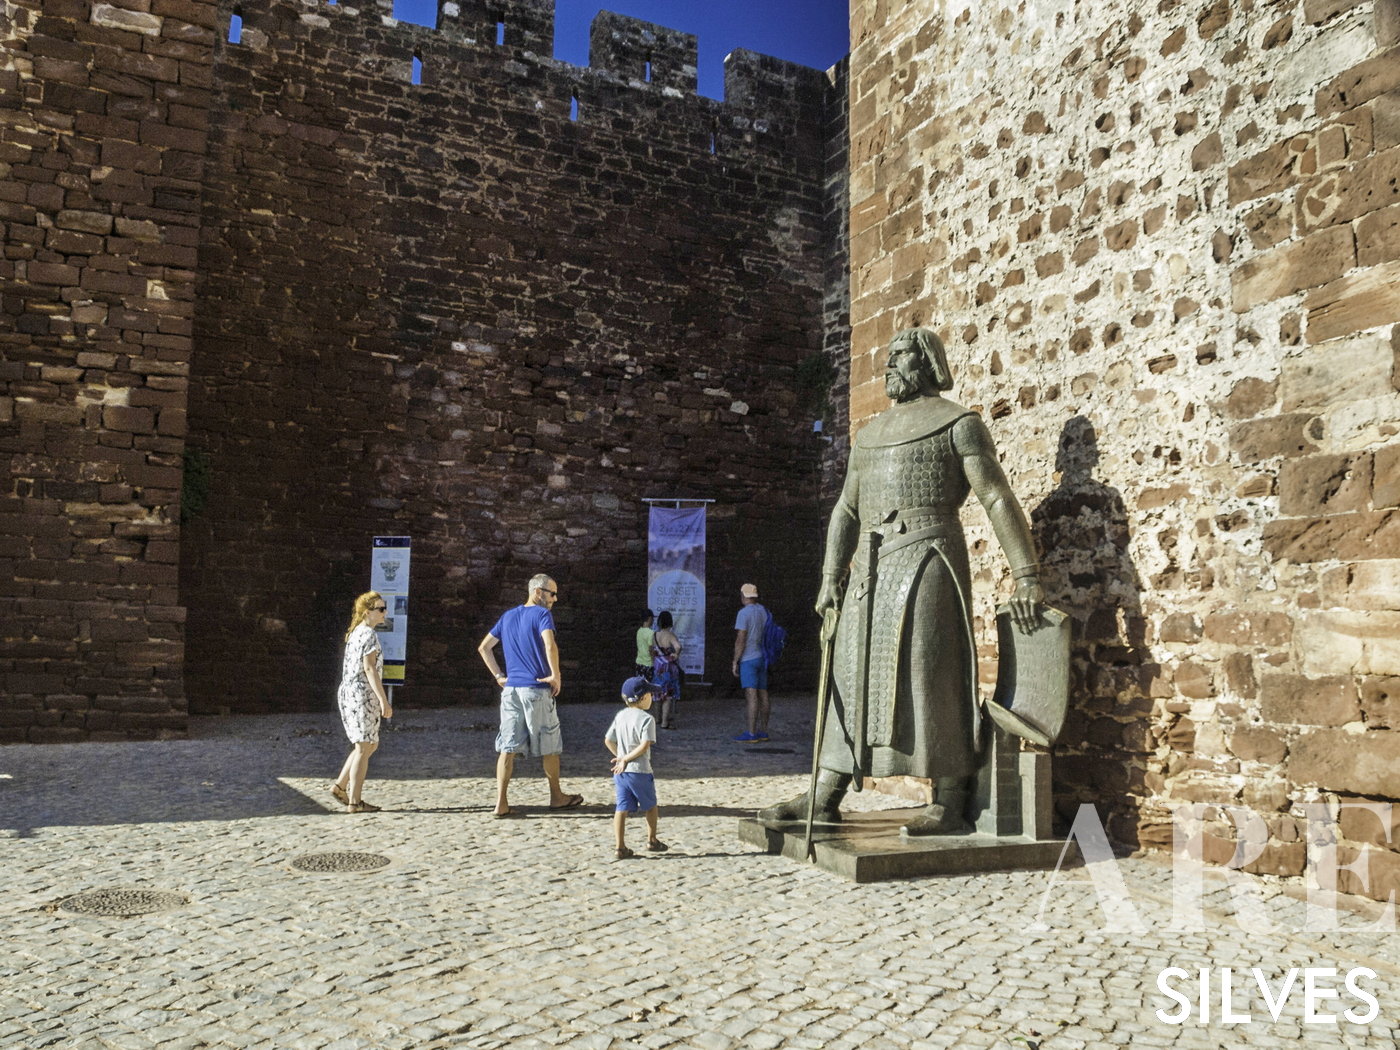 Entrance of Silves Castle with Statue of King D. Sancho I